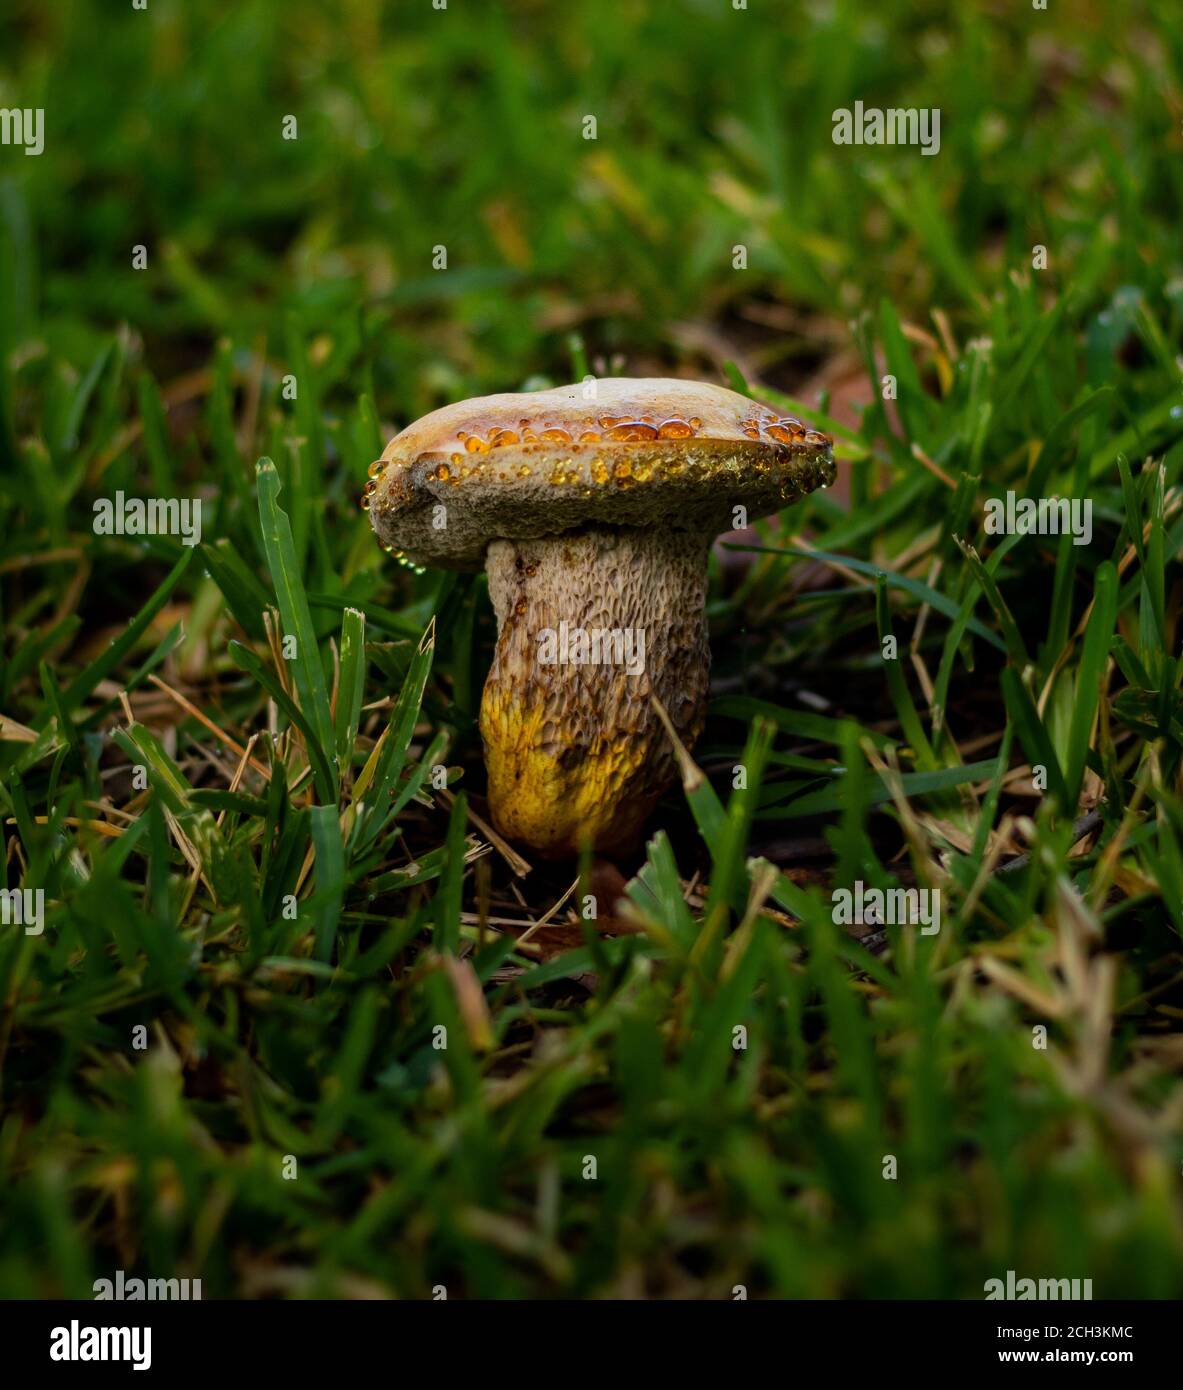 Closeup of small brown and yellow mushroom with moisture droplets in green grass Stock Photo